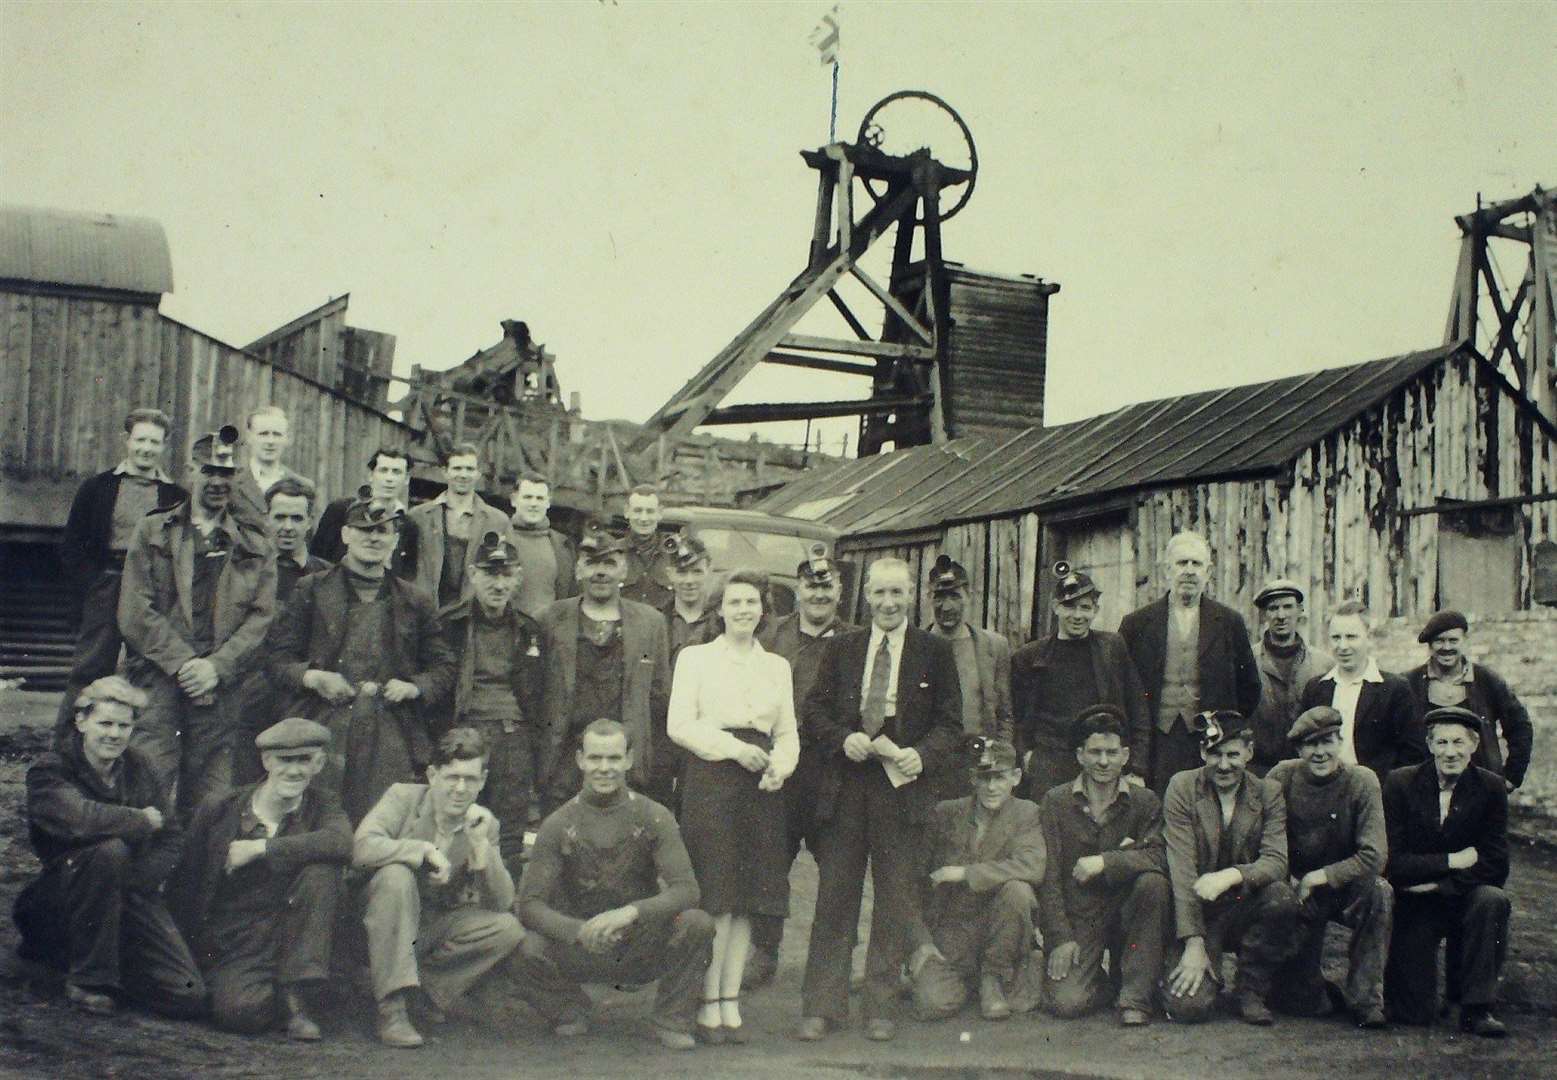 The archive centre holds a scrapbook from Brora colliery, giving an insight into its workings.